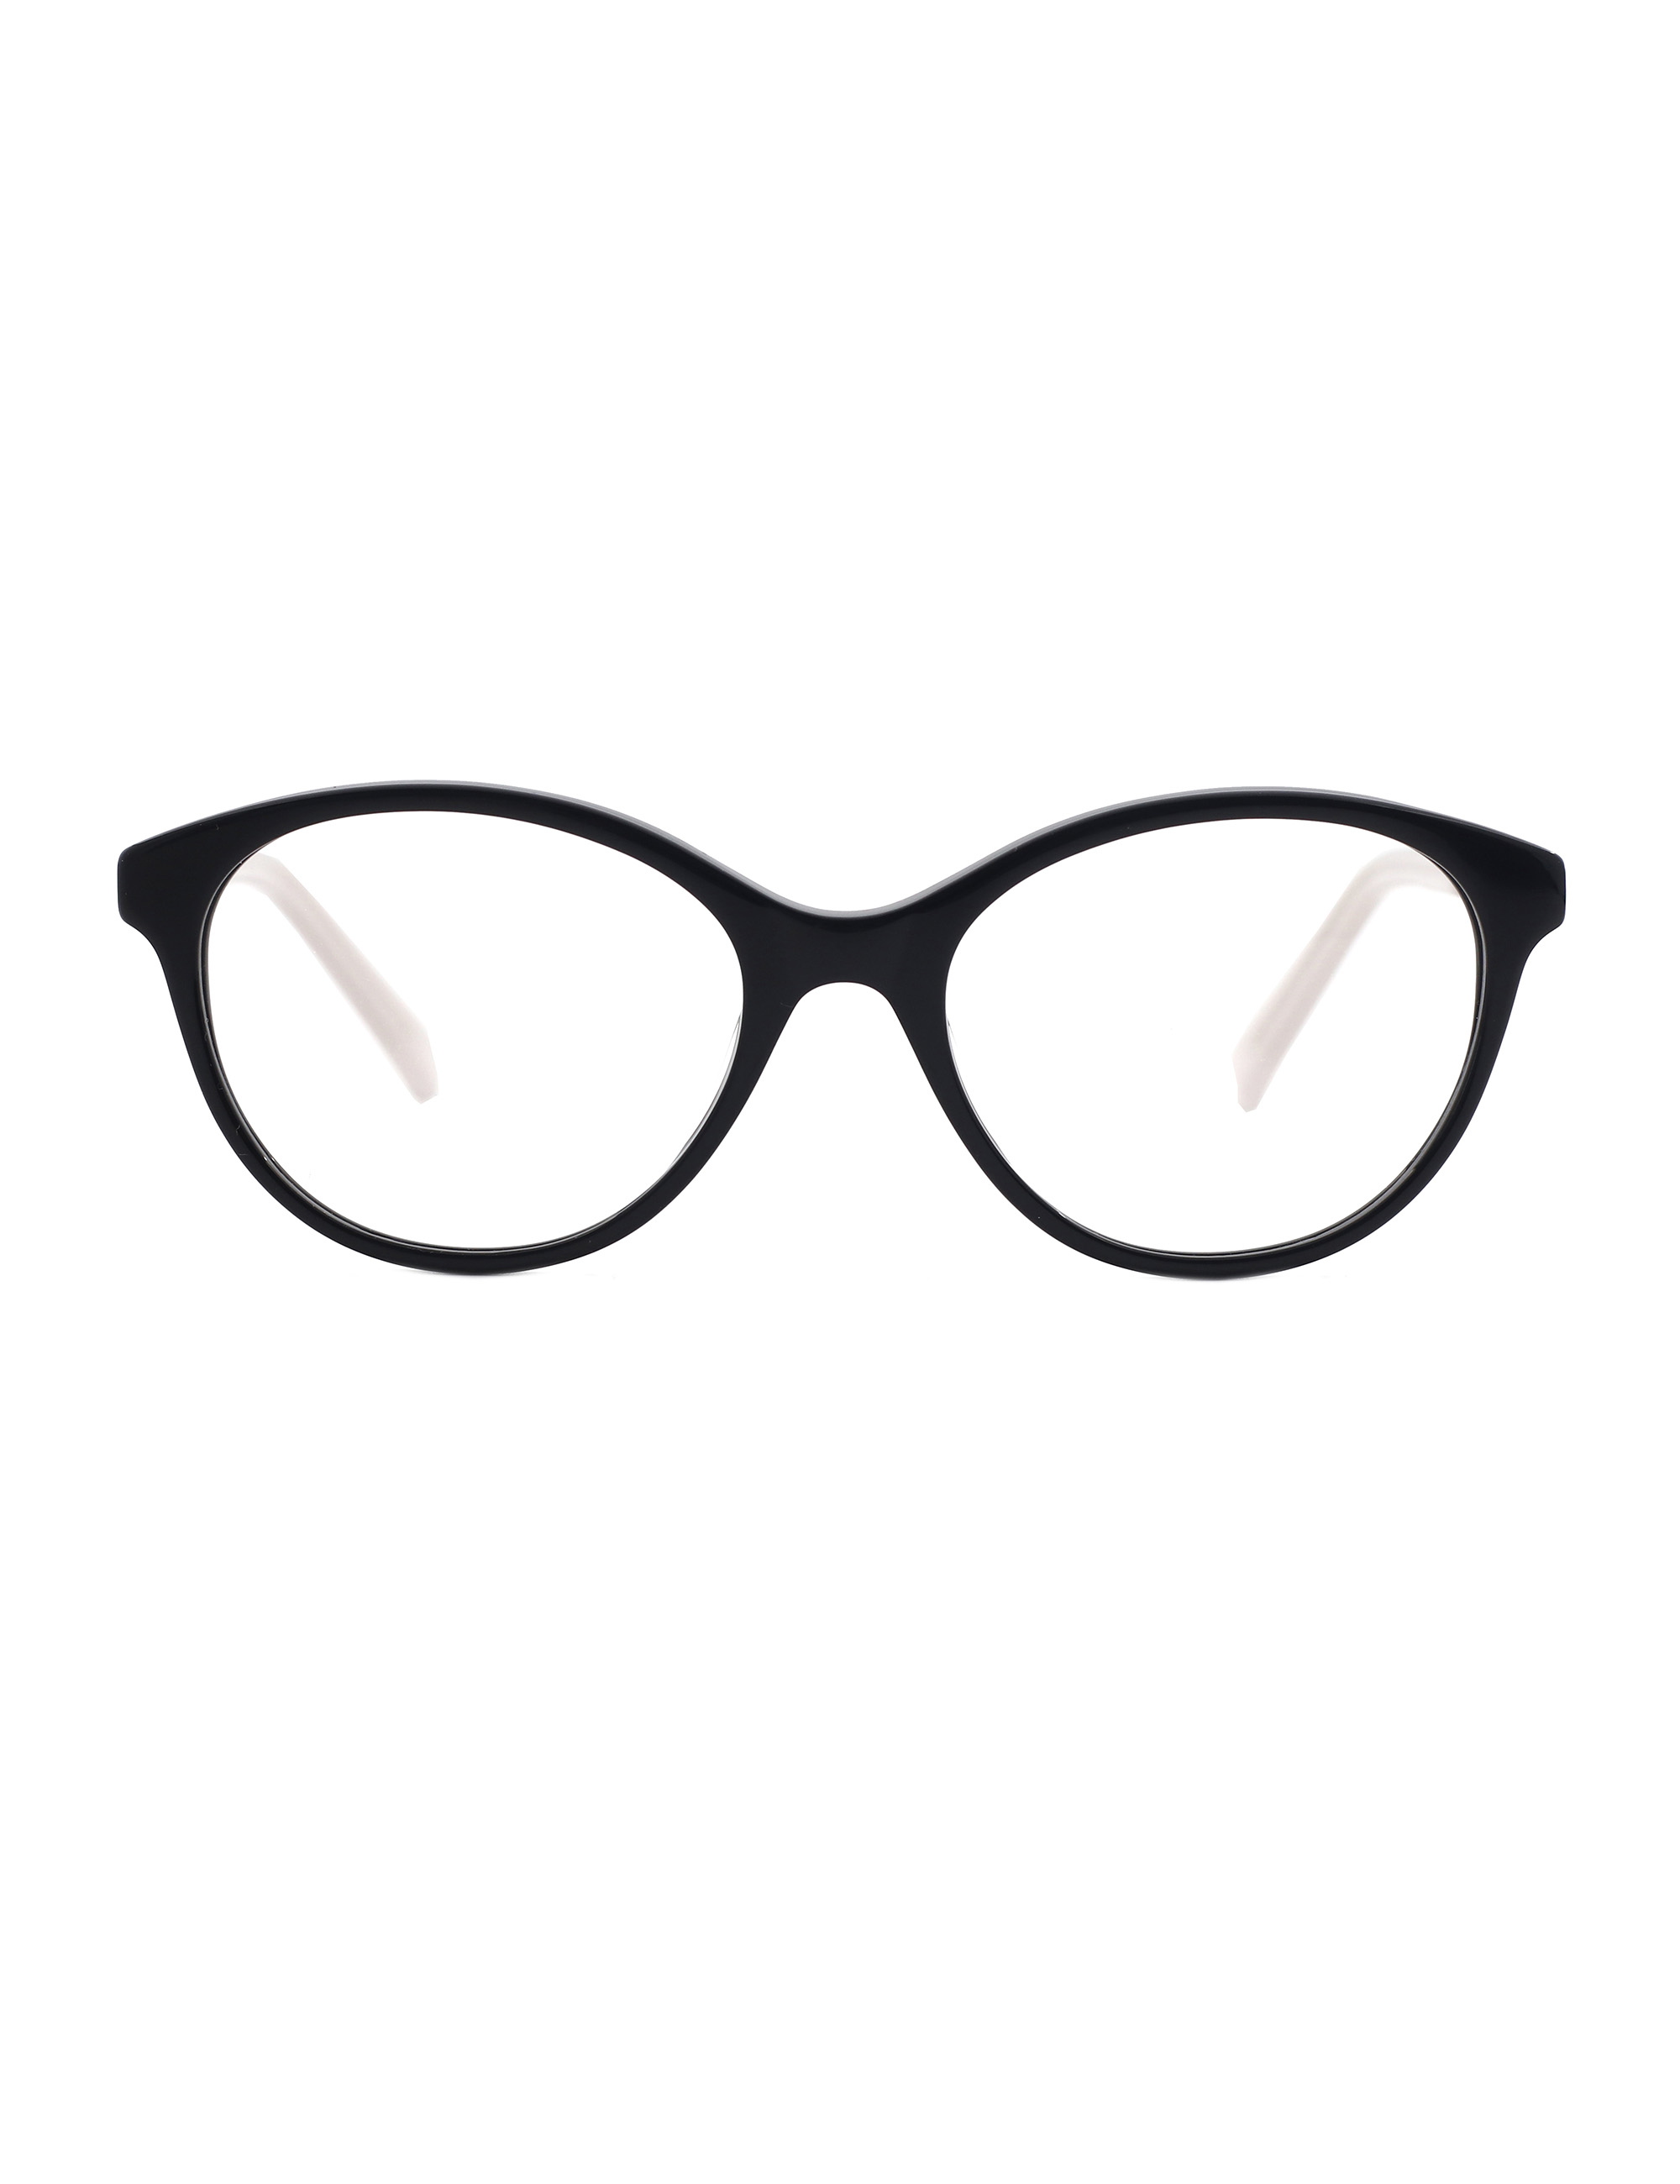 Round Acetate Optical Glasses Frame Featured Image